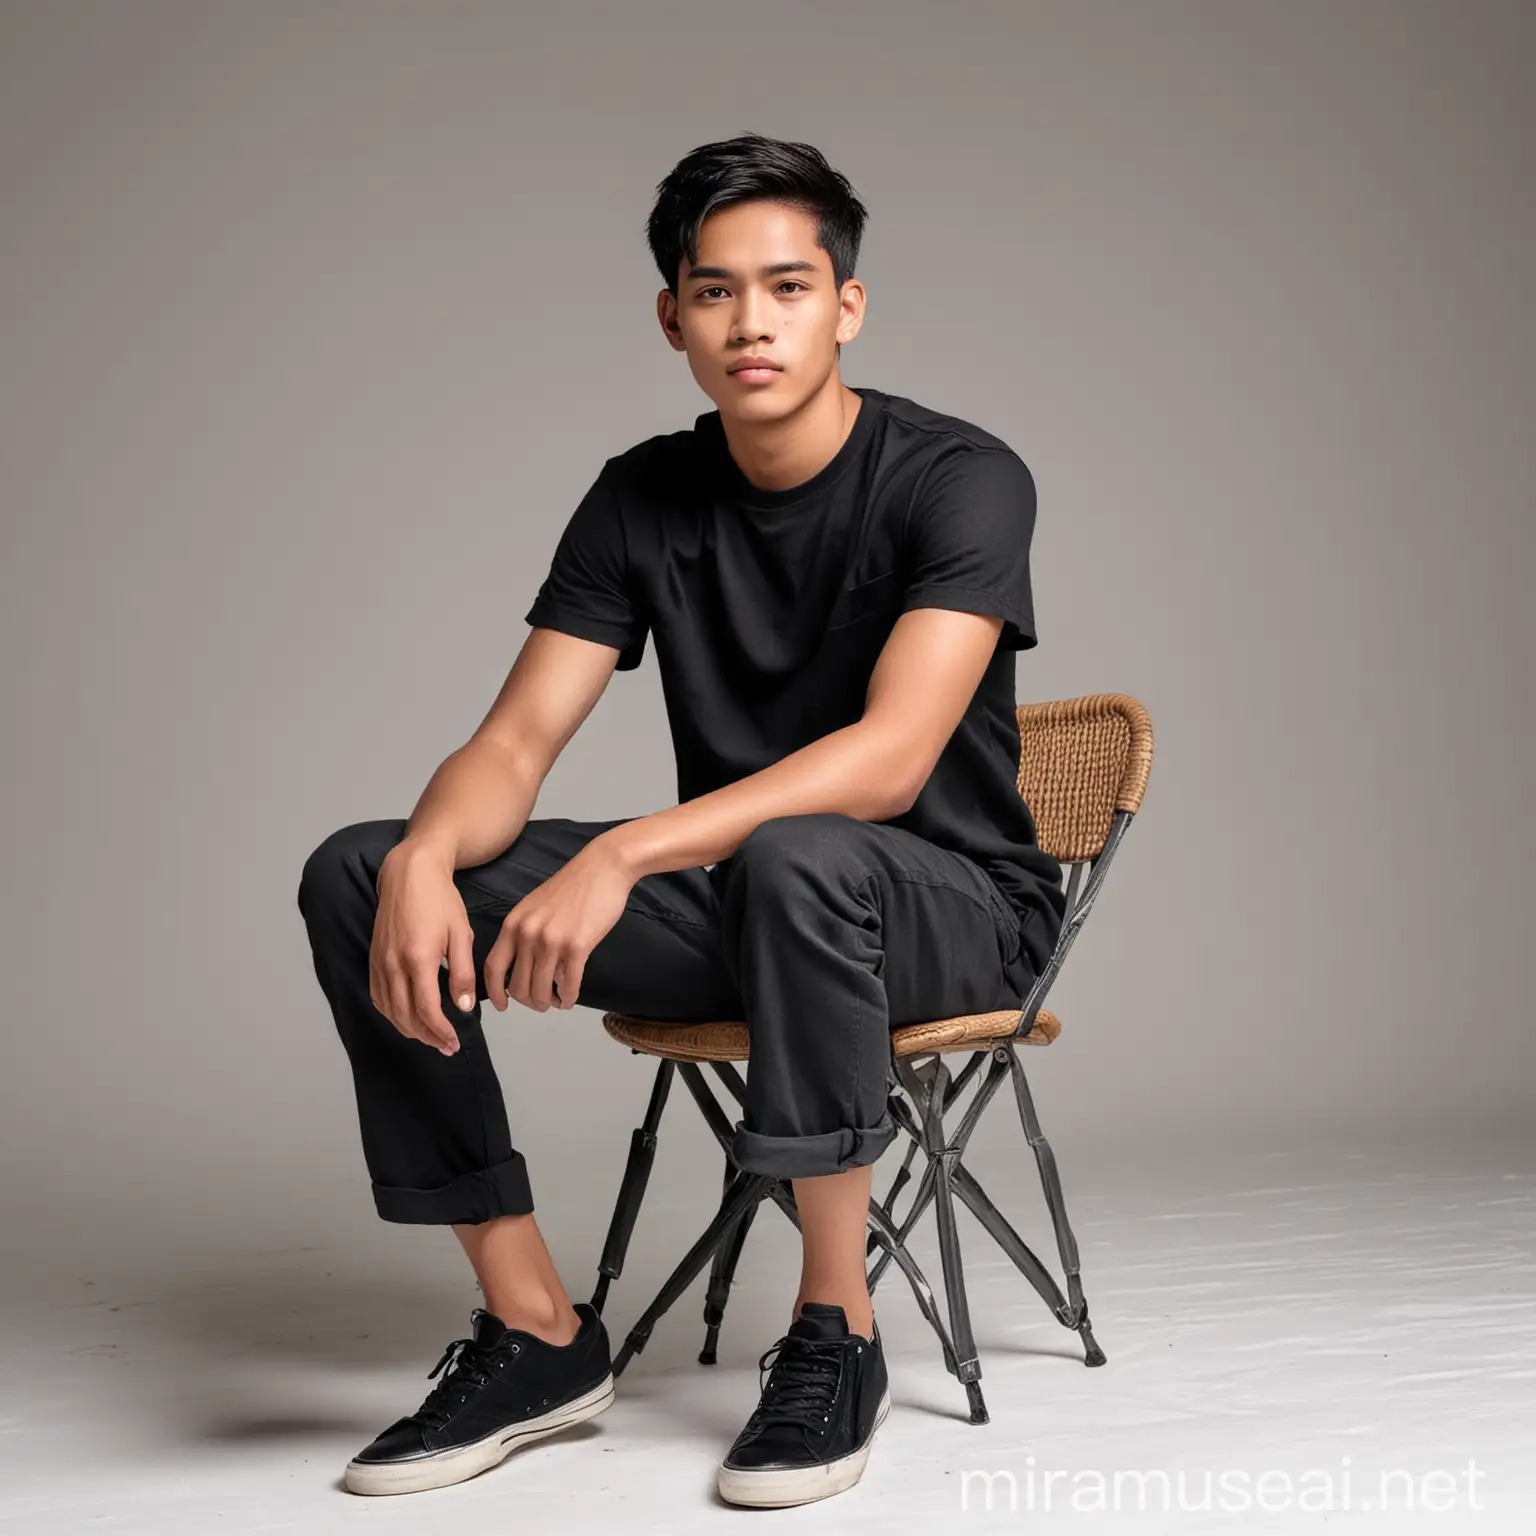 Young Indonesian Male Model in Black Shirt and Sneakers Sitting Sideways on Chair